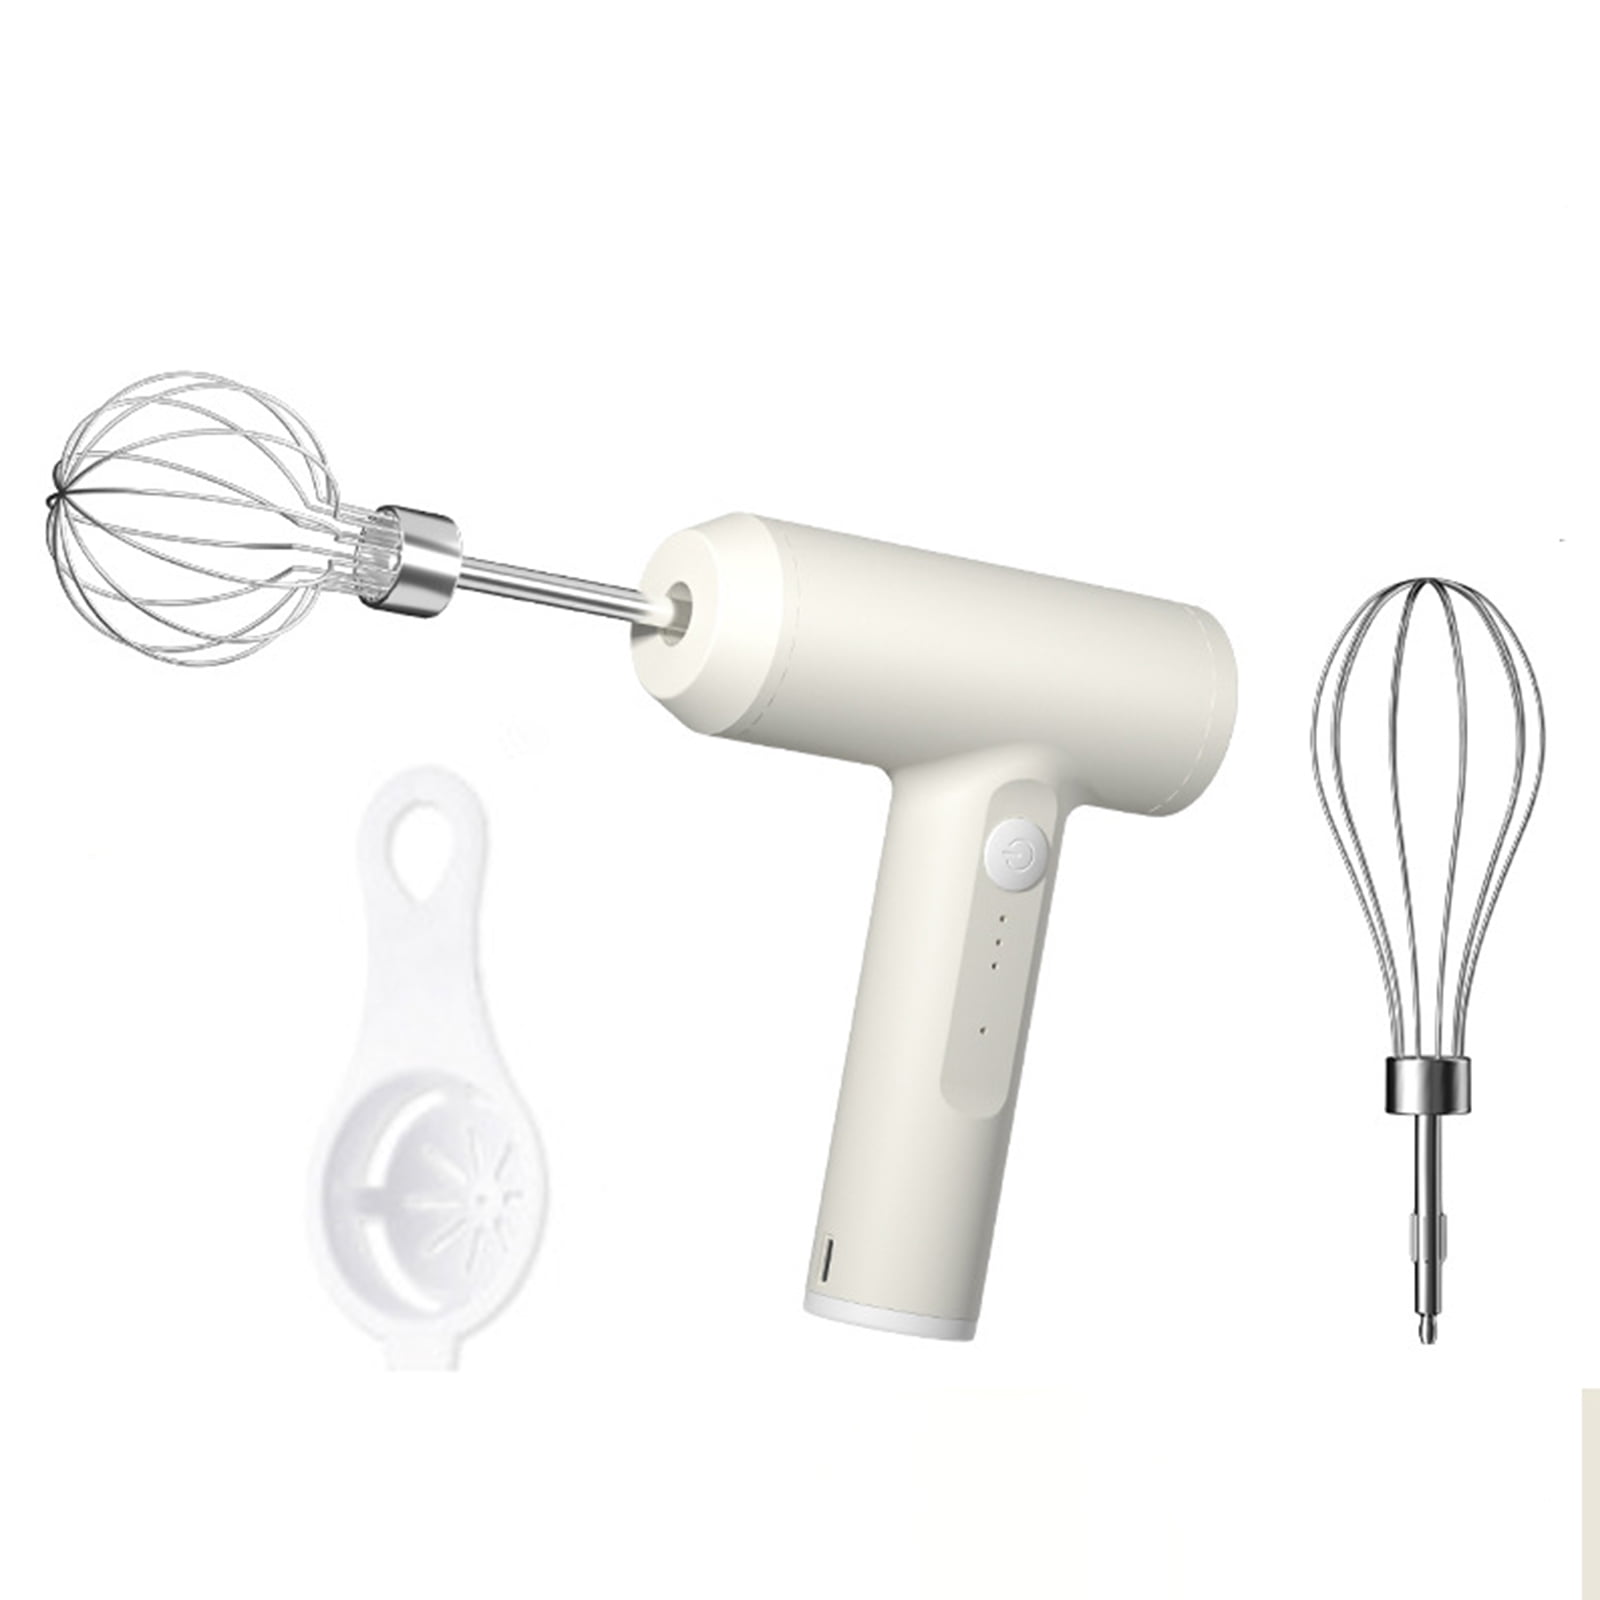 Handheld electric egg beater，Cordless Baking Cream Whisk, 3-in-1 Hand Mixer  for Home Kitchen Baking 